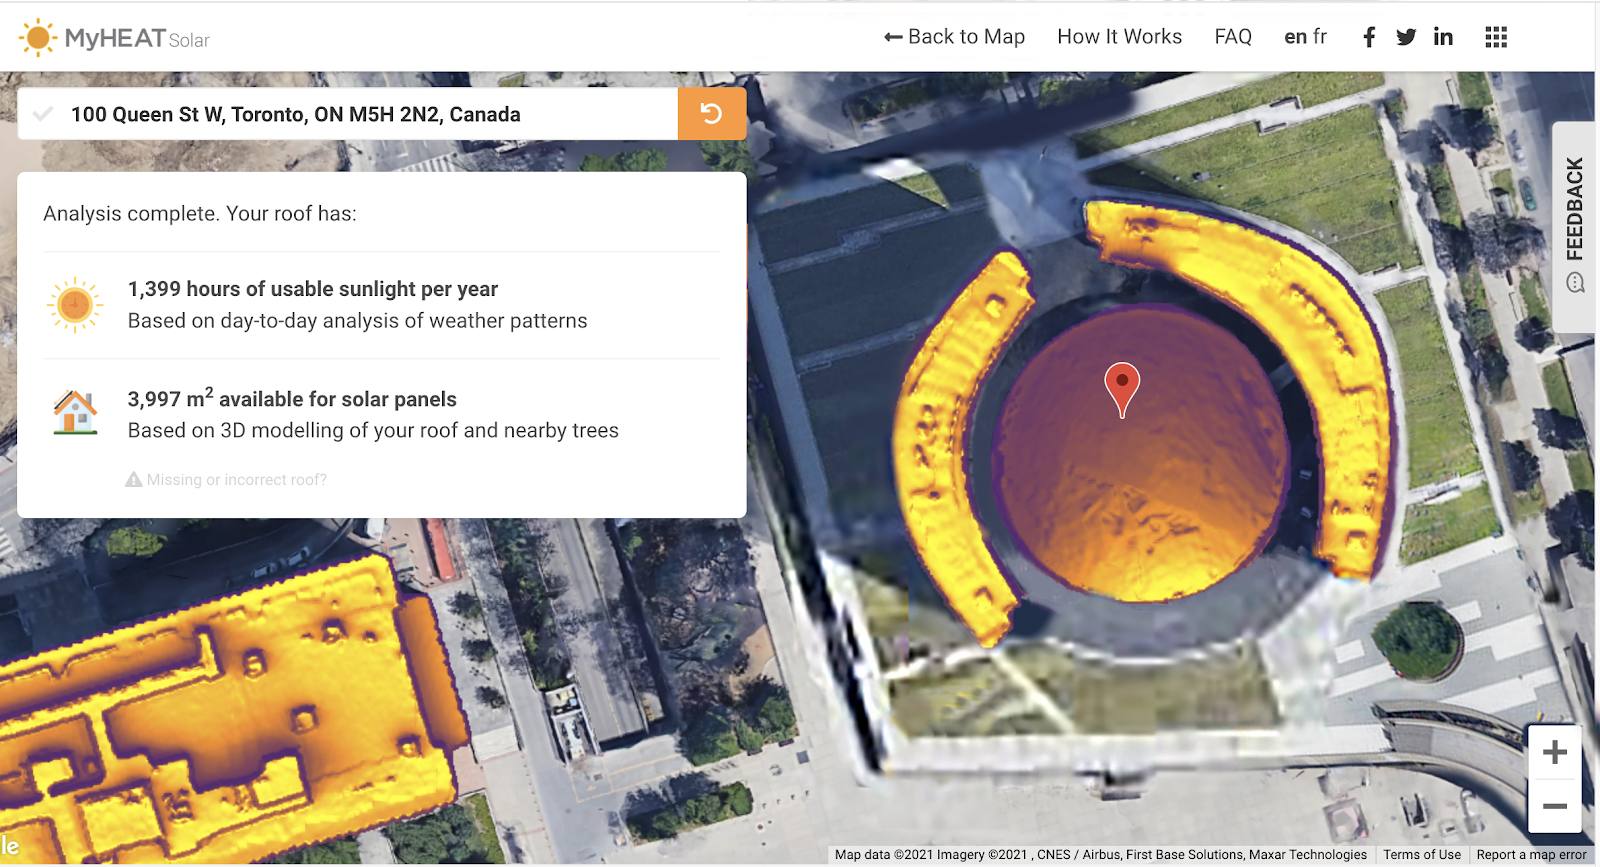 A solar map showing how much sun the roof of the Toronto City Hall building gets at 100 Queen St. W, Toronto, Ontario